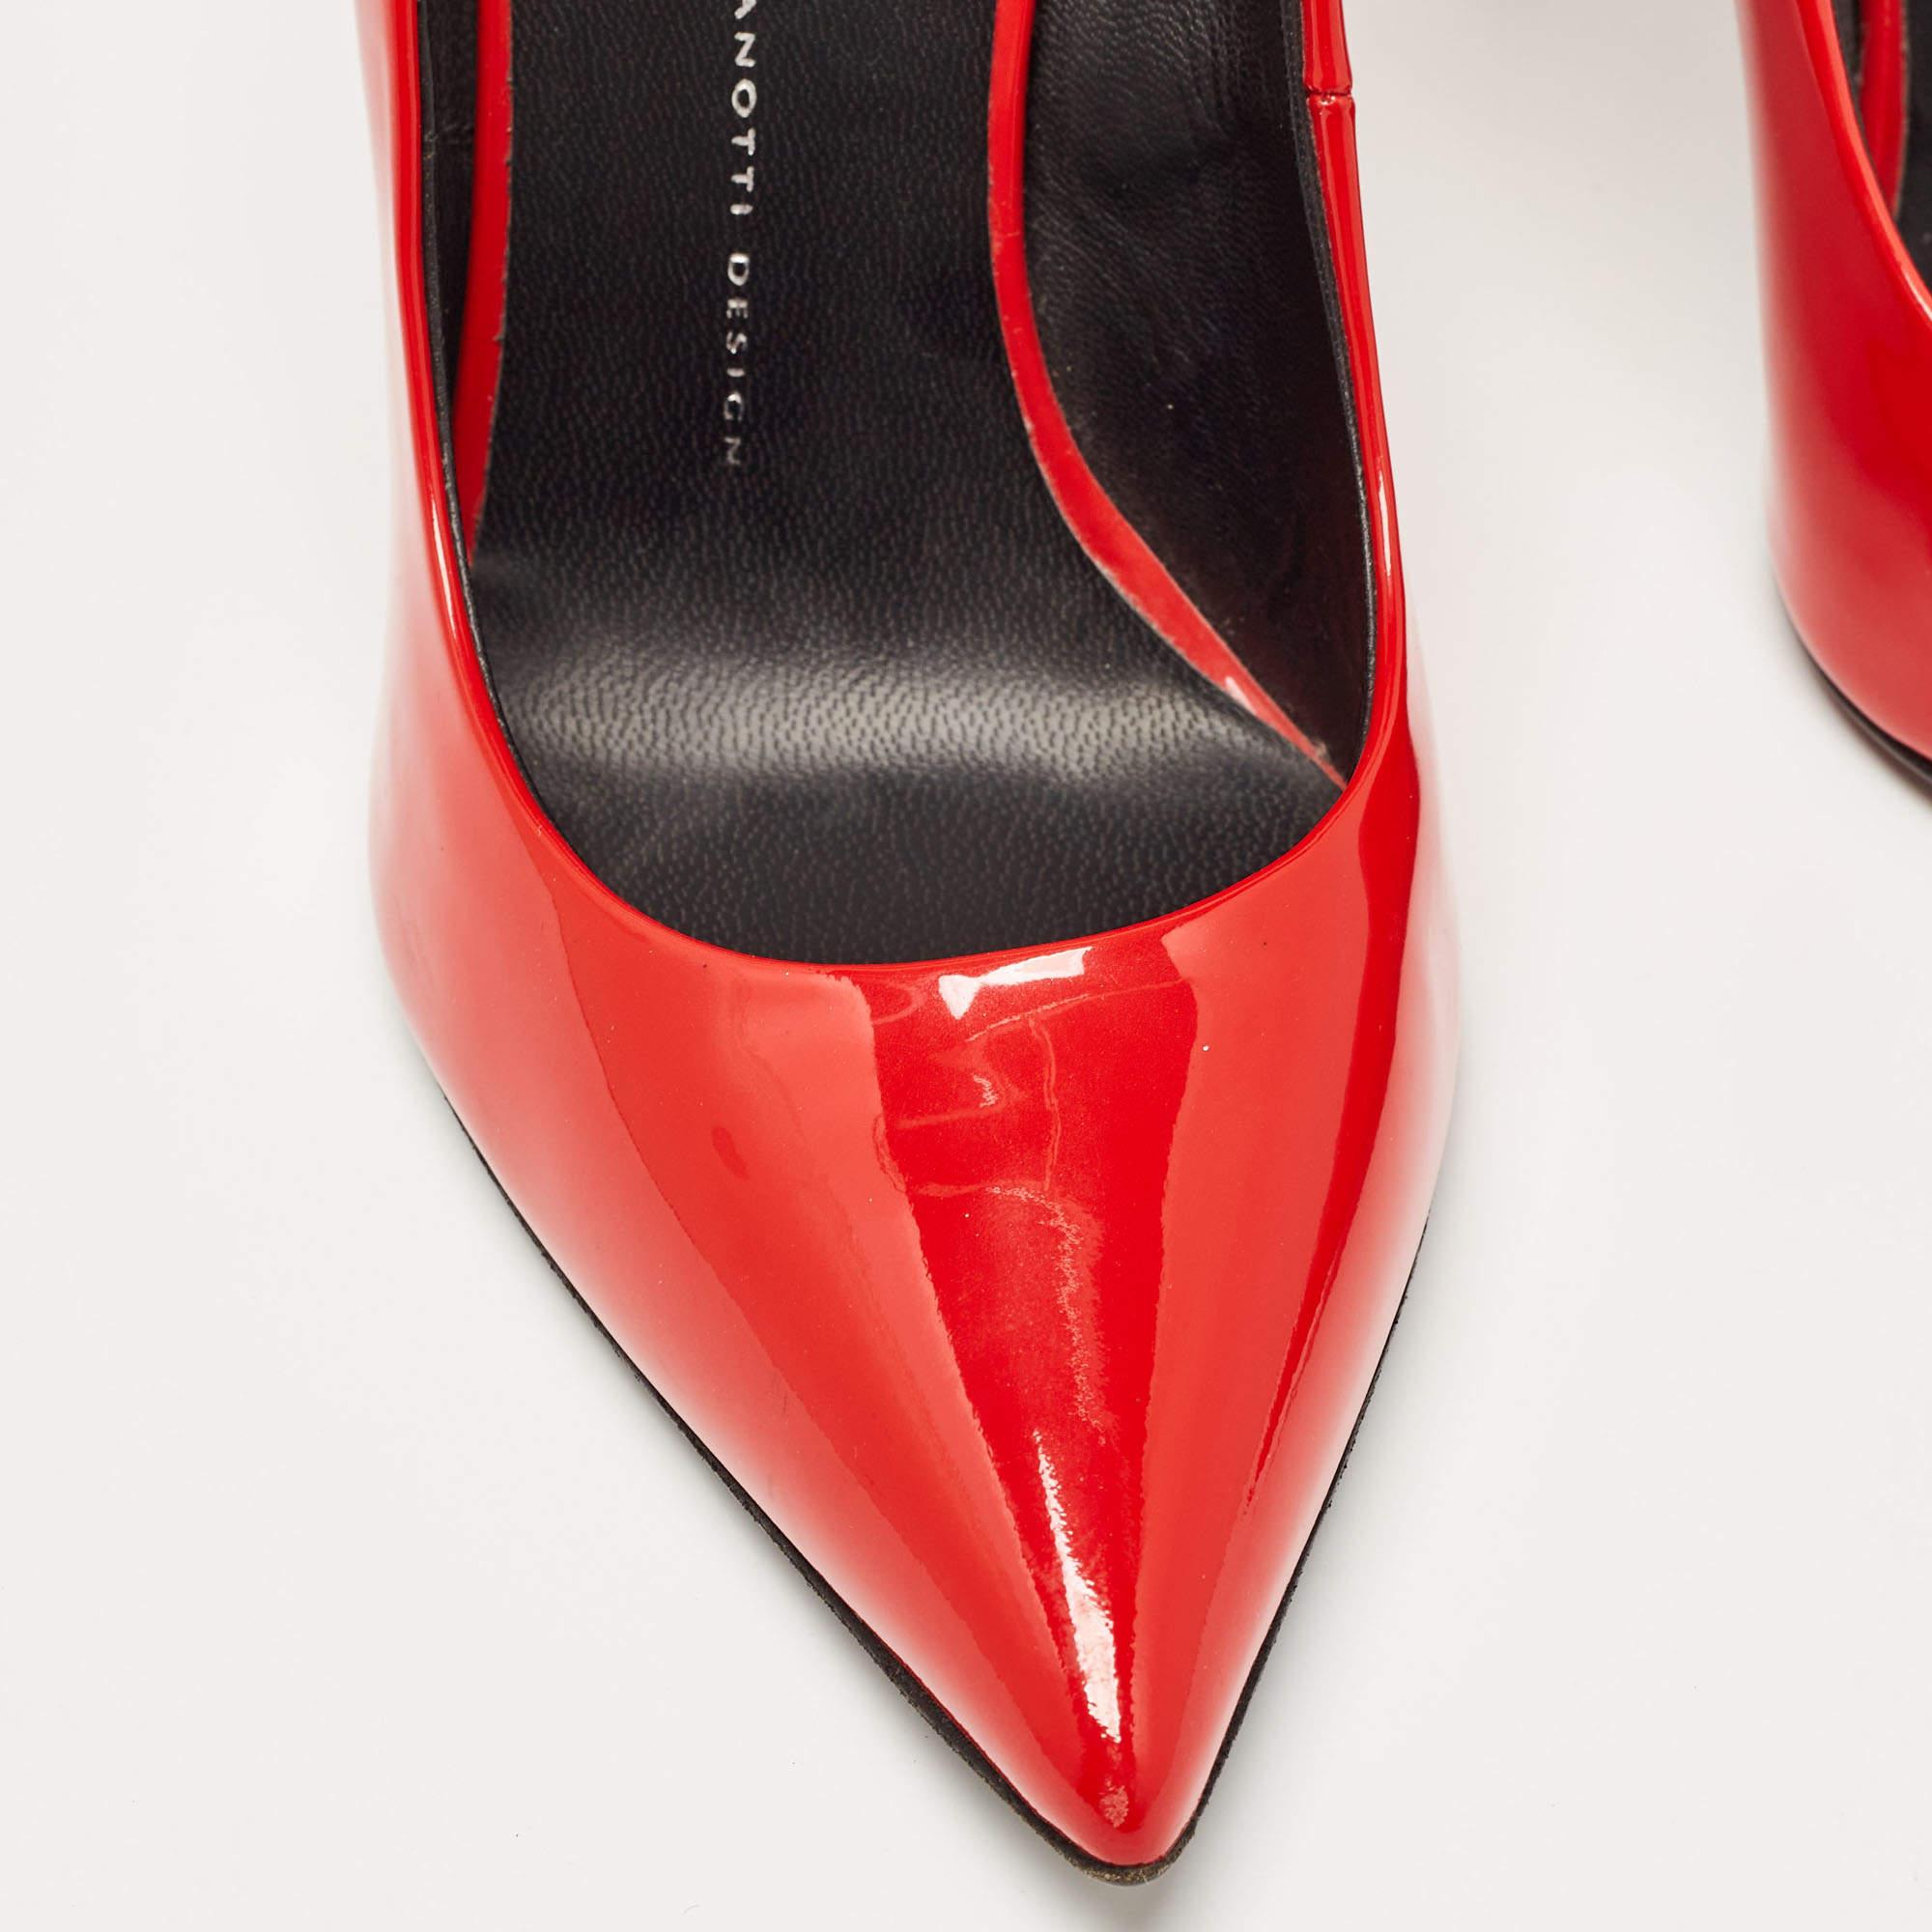 Giuseppe Zanotti Red Patent Leather Pointed Toe Pumps Size 41 For Sale 3